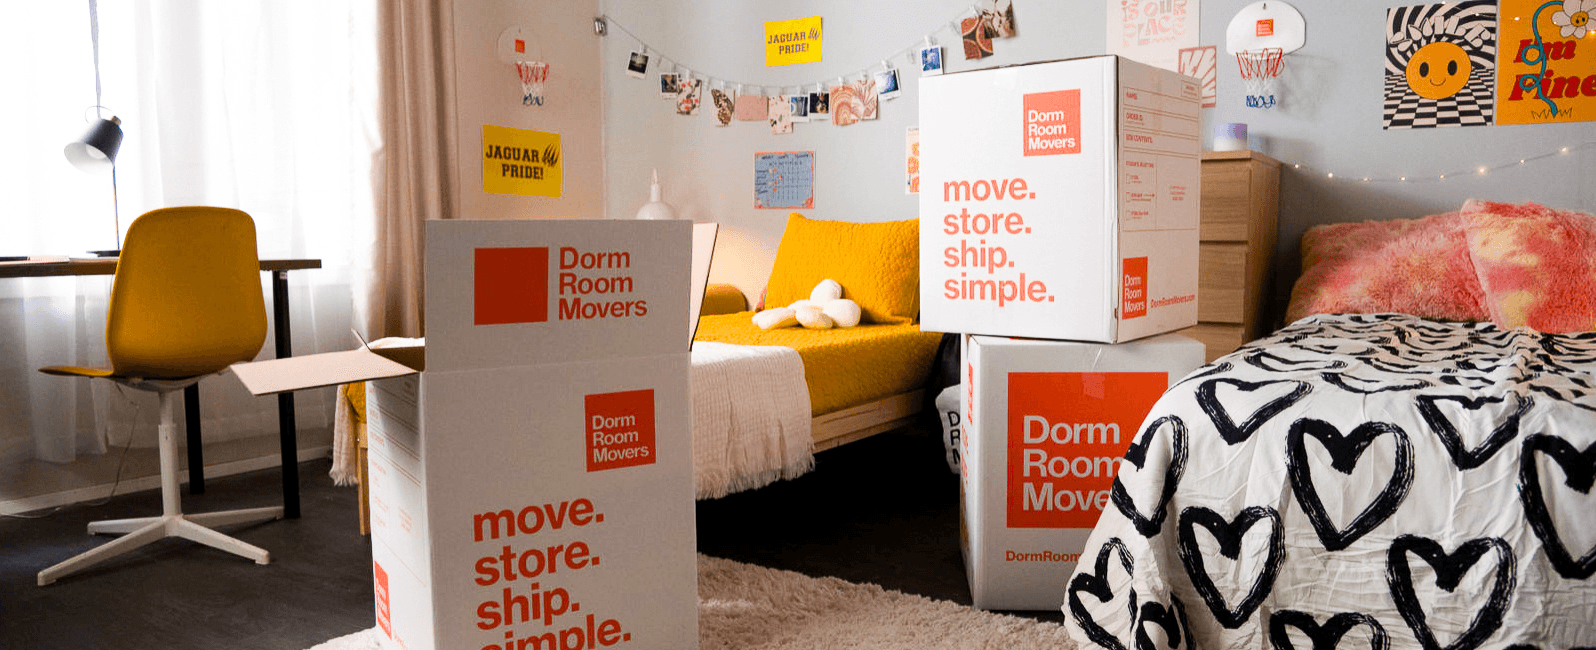 Want to Work for Dorm Room Movers?